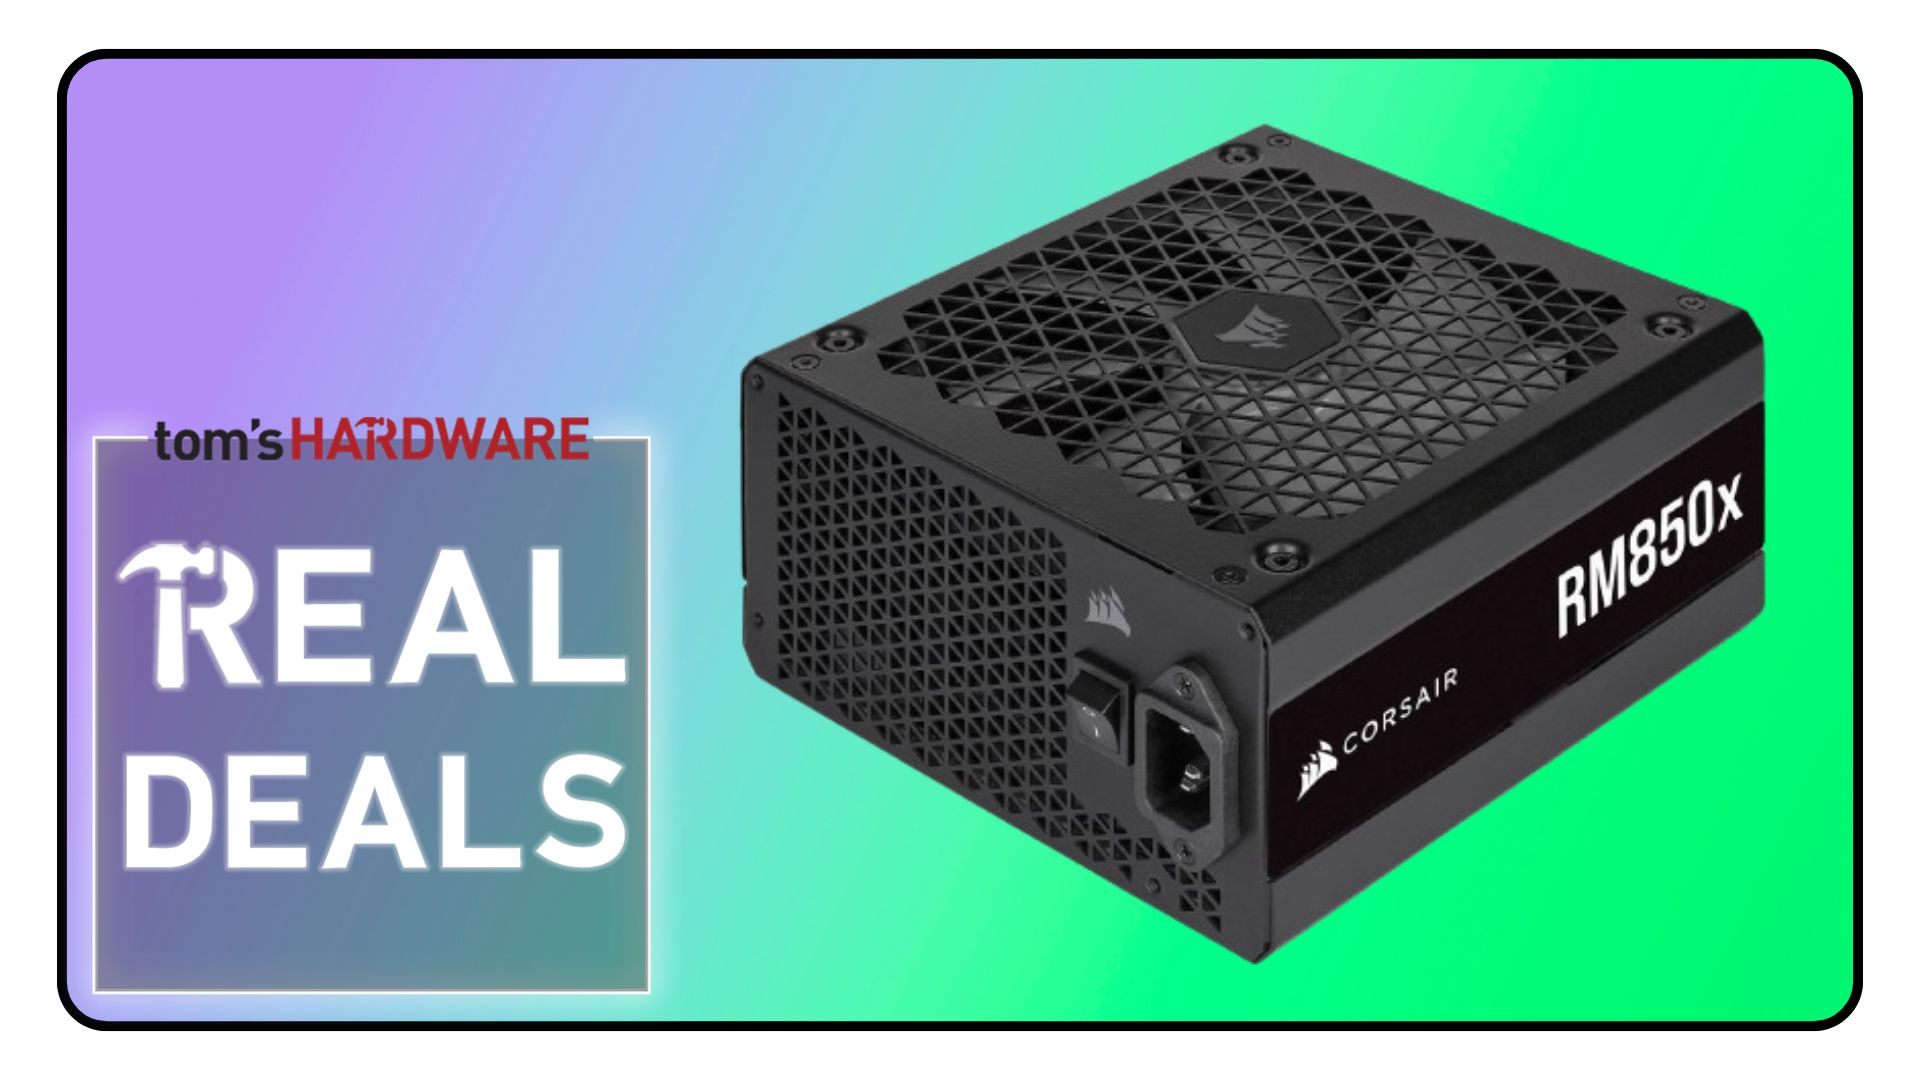 Power your PC with an 850W Corsair RM850x for just $89